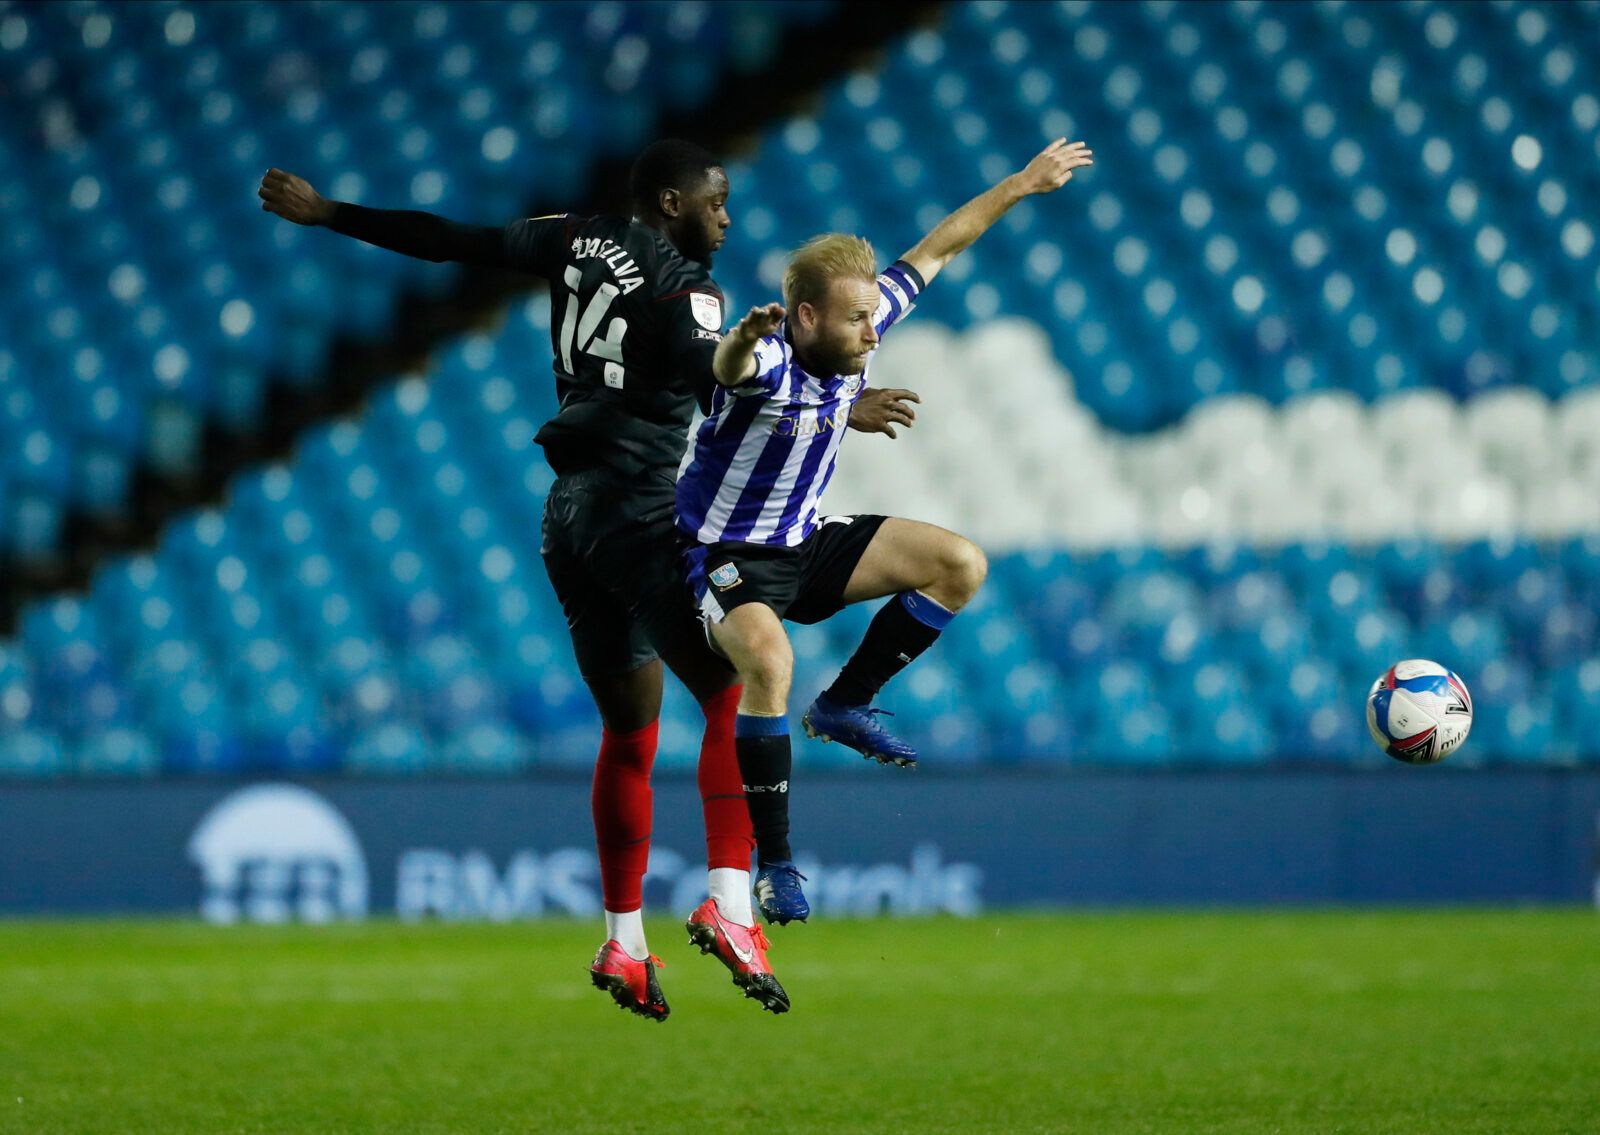 Soccer Football - Championship - Sheffield Wednesday v Brentford - Hillsborough, Sheffield, Britain - October 21, 2020  Sheffield Wednesdays' Barry Bannan in action with Brentford's Josh DaSilva Action Images/Lee Smith EDITORIAL USE ONLY. No use with unauthorized audio, video, data, fixture lists, club/league logos or 'live' services. Online in-match use limited to 75 images, no video emulation. No use in betting, games or single club /league/player publications.  Please contact your account rep